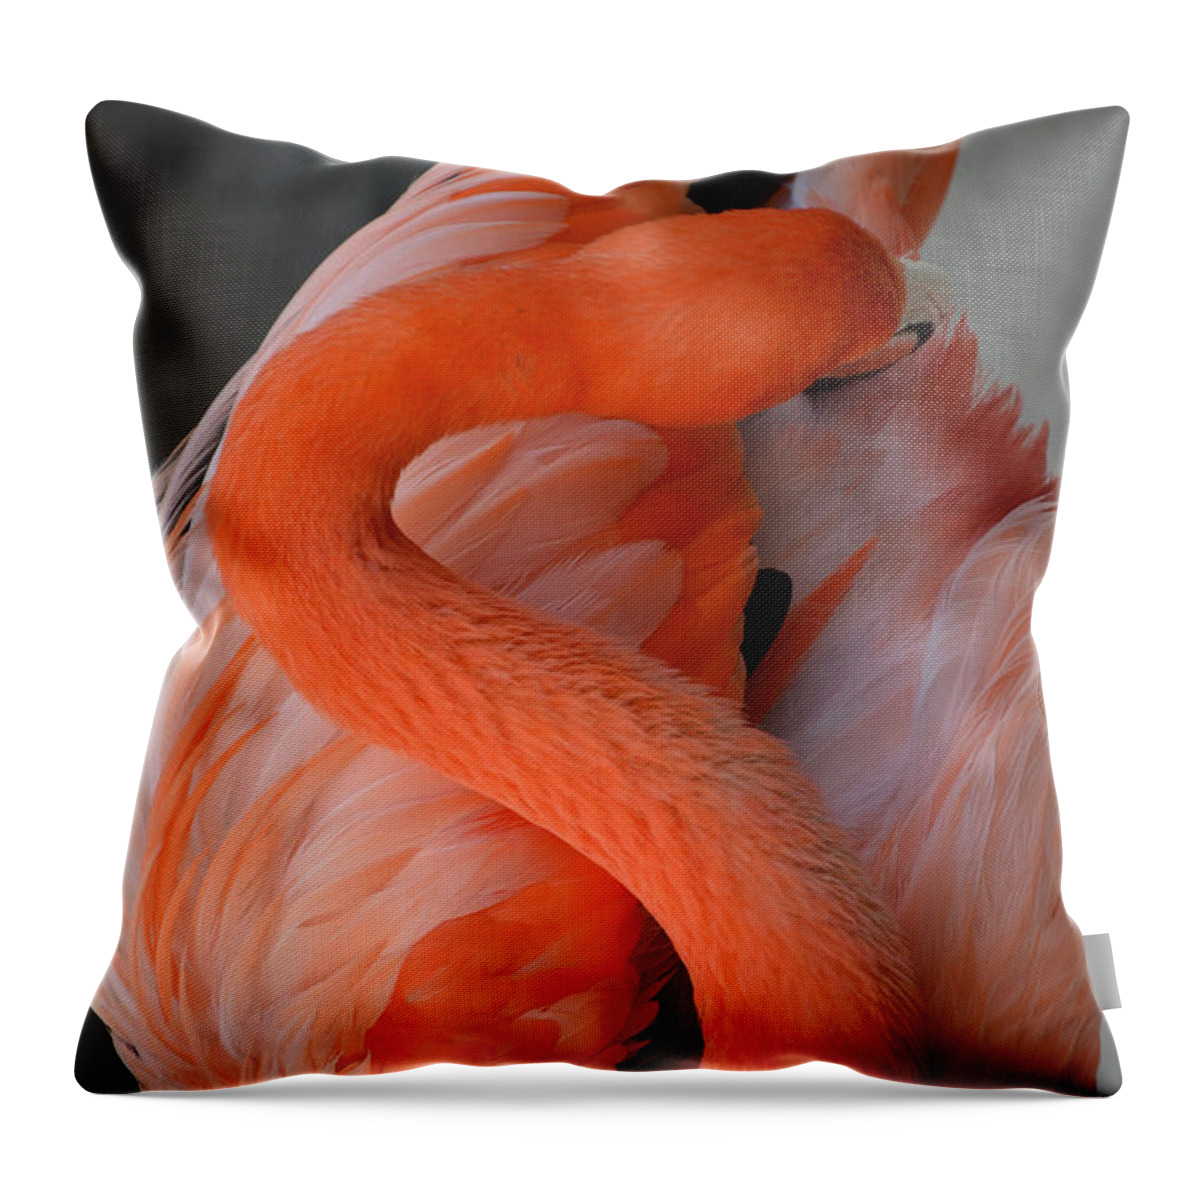 Pink Flamingo Throw Pillow featuring the photograph Pink Flamingo by Robert Meanor